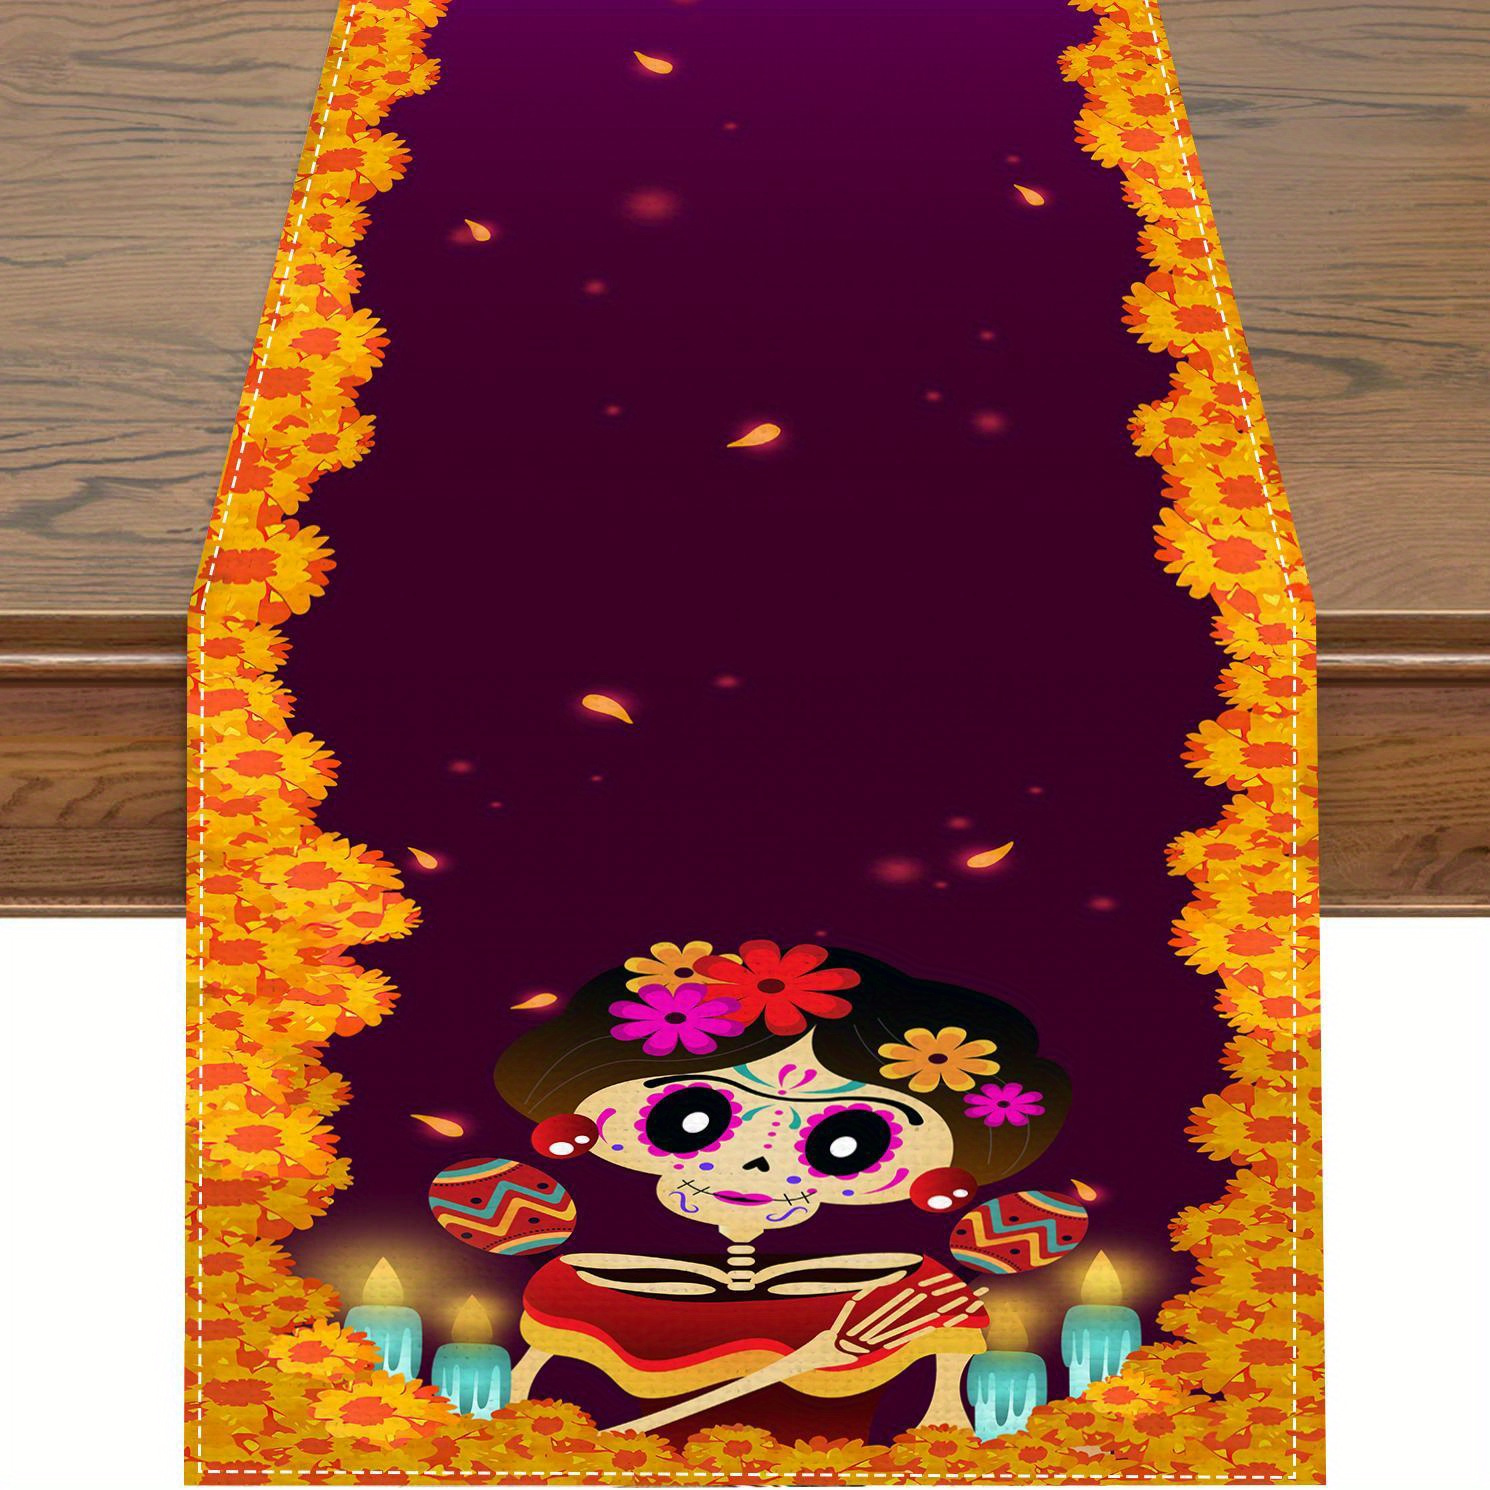 

Dia De Los Muertos Table Runner - 1pc, Woven Polyester Marigold Coco Theme, Festive Rectangular Day Of The Dead Home Kitchen Dining Decor, 13x72 Inches